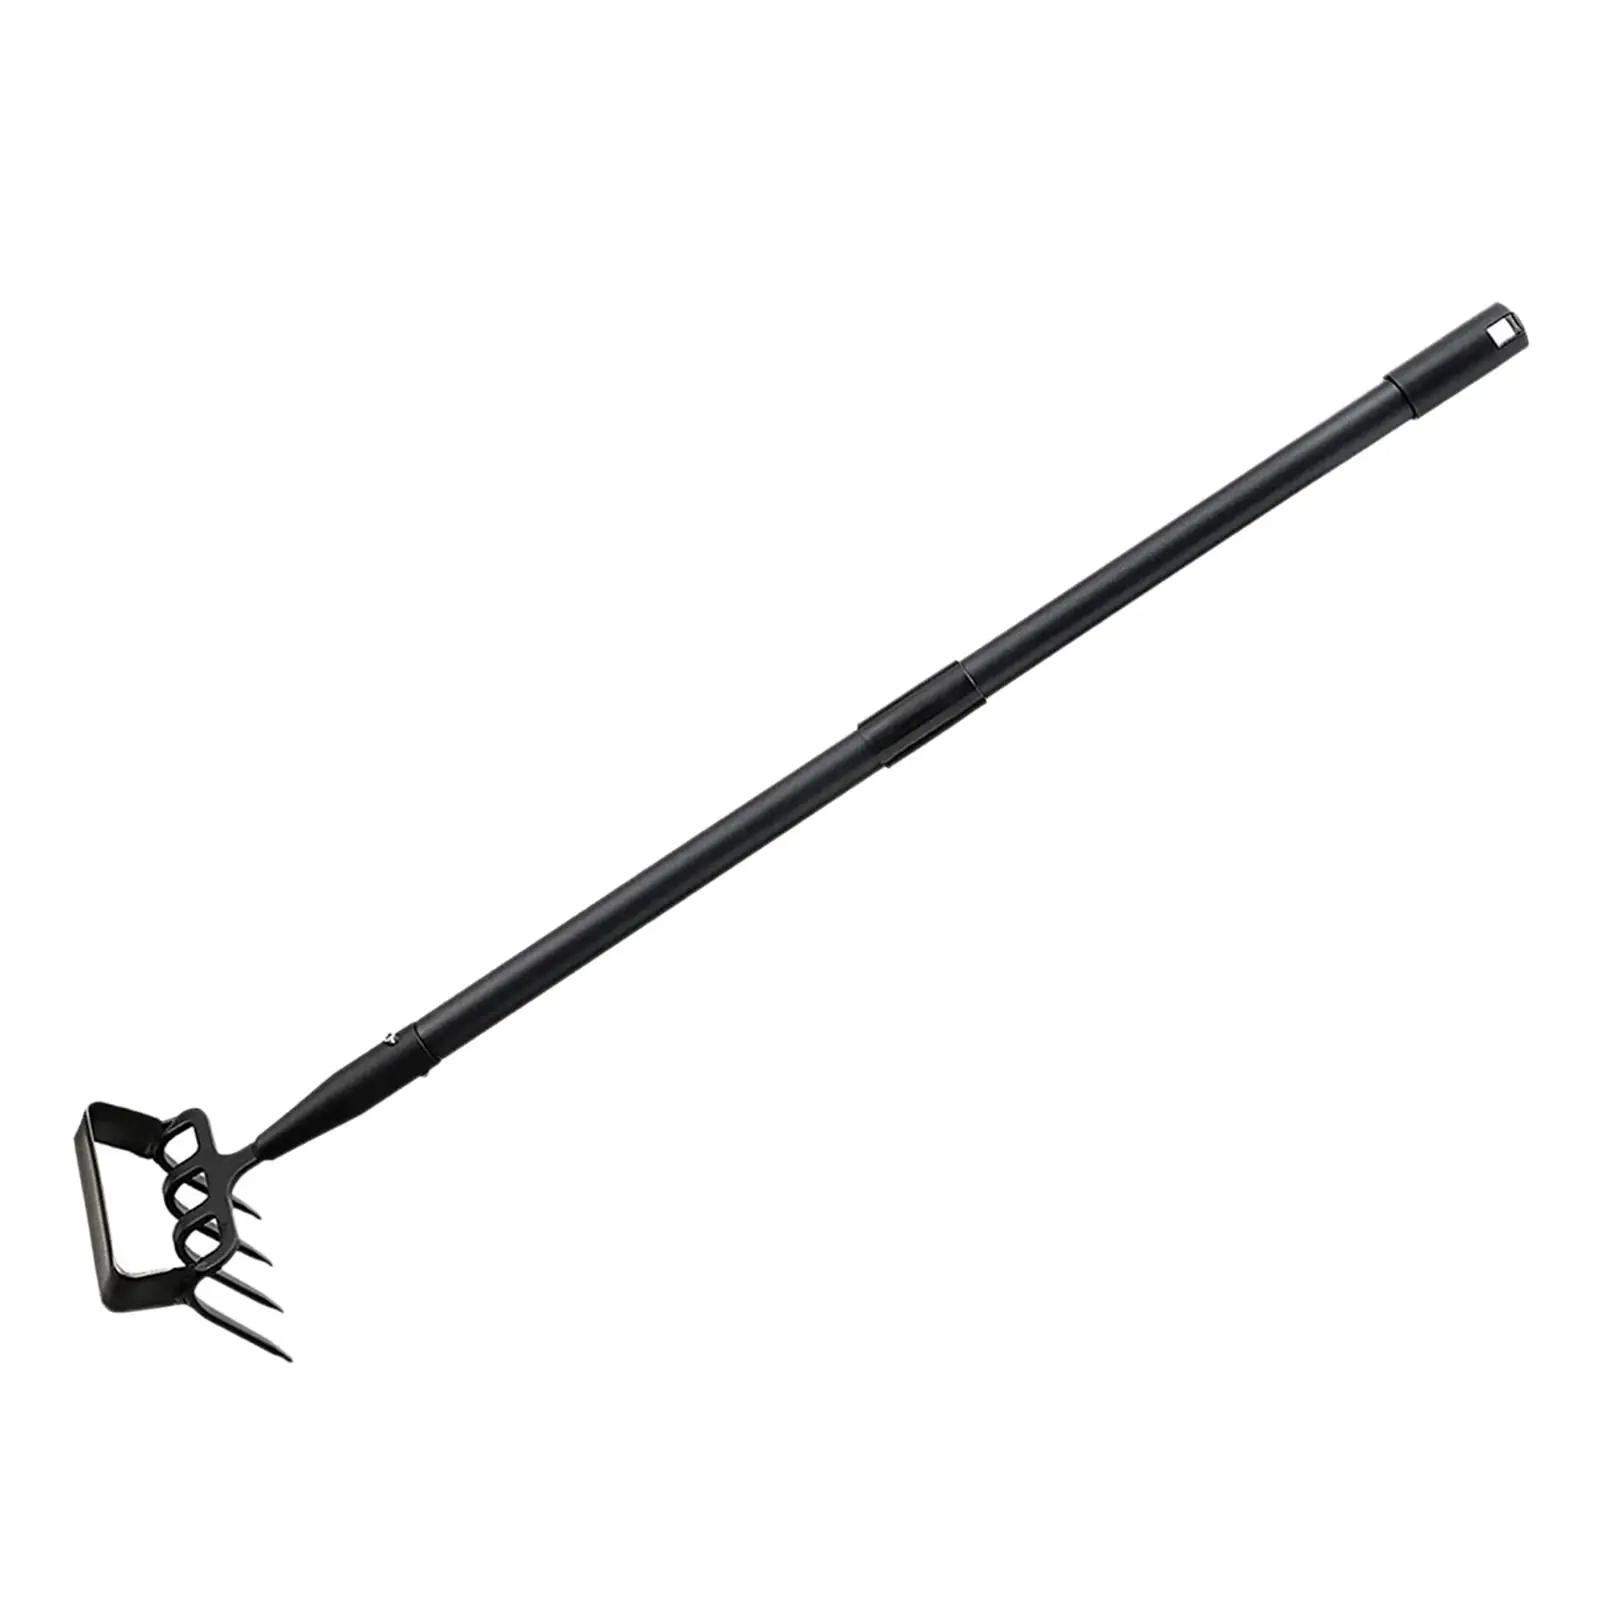 Garden Weeder Hand Tool 2 in 1 Heavy Duty Stirrup Hoe and Cultivator Metal Weeder Puller for Lawn Digging Loosening Cultivating